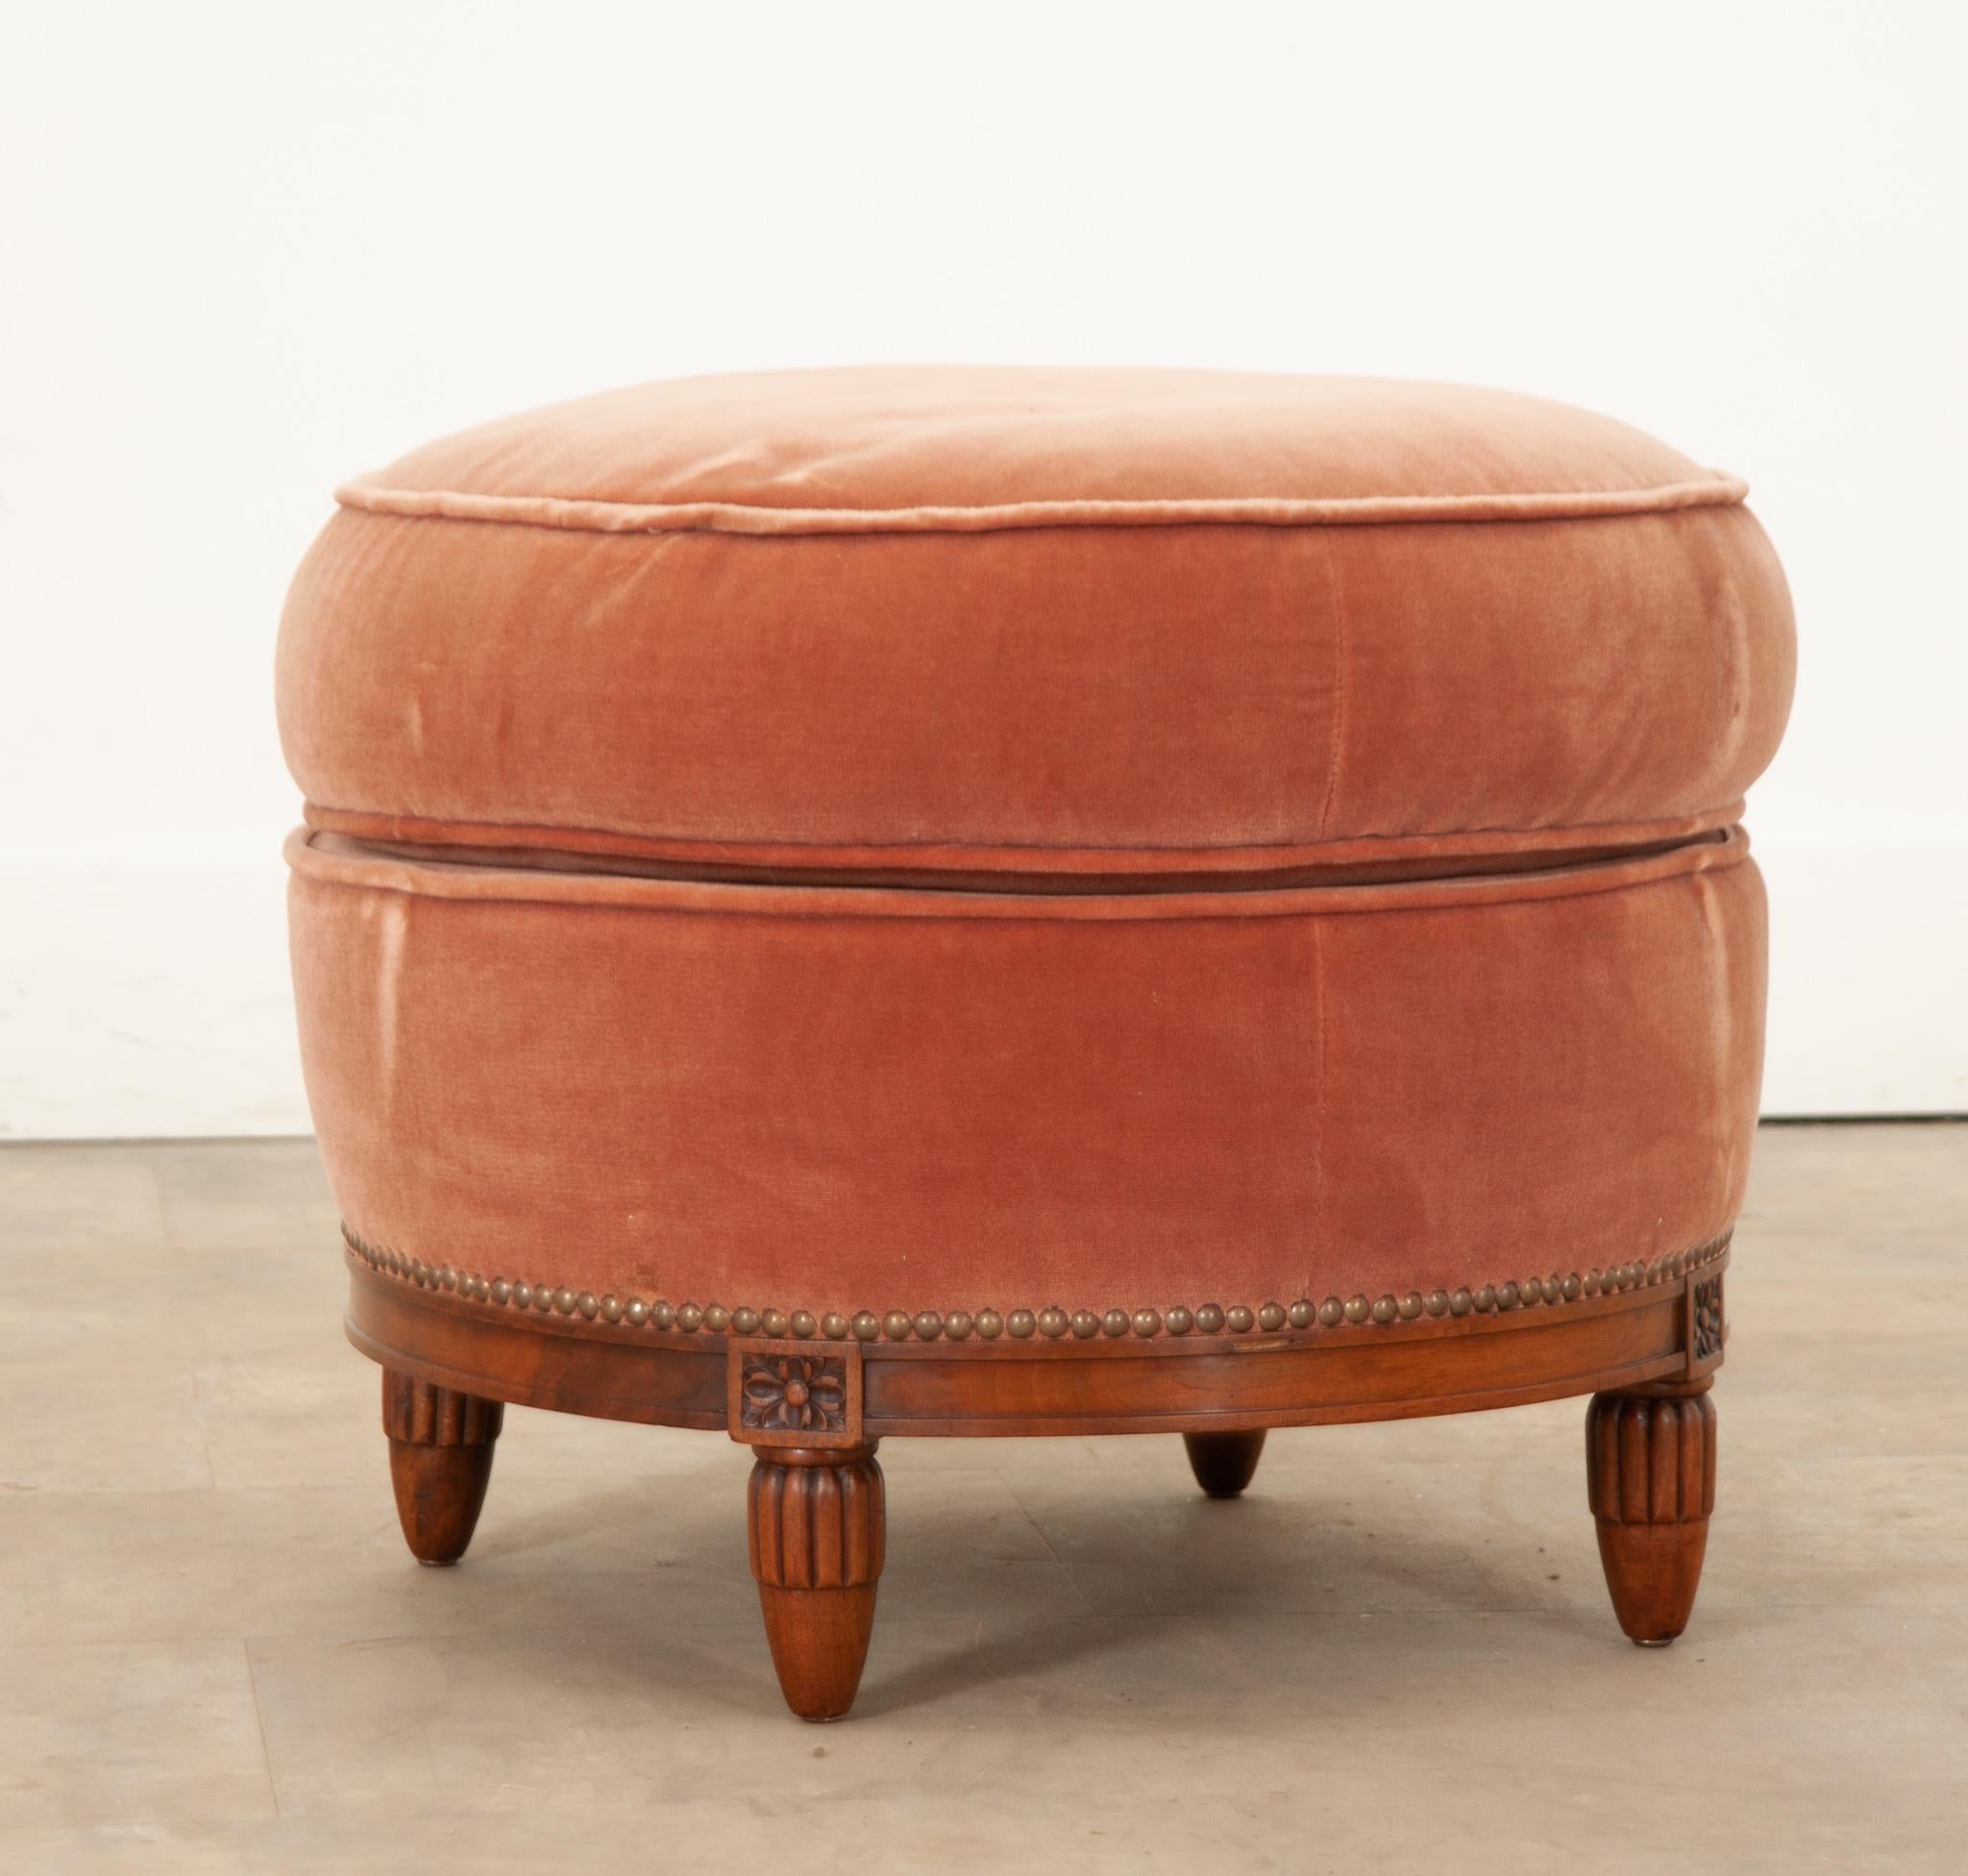 A pretty and plush pouf, ottoman, or footstool in the Louis XVI style with elegant hand-carved elements and coral pink velvet upholstery. Its round solid mahogany wood frame is beautiful with intricately carved framed rosettes on each of its four